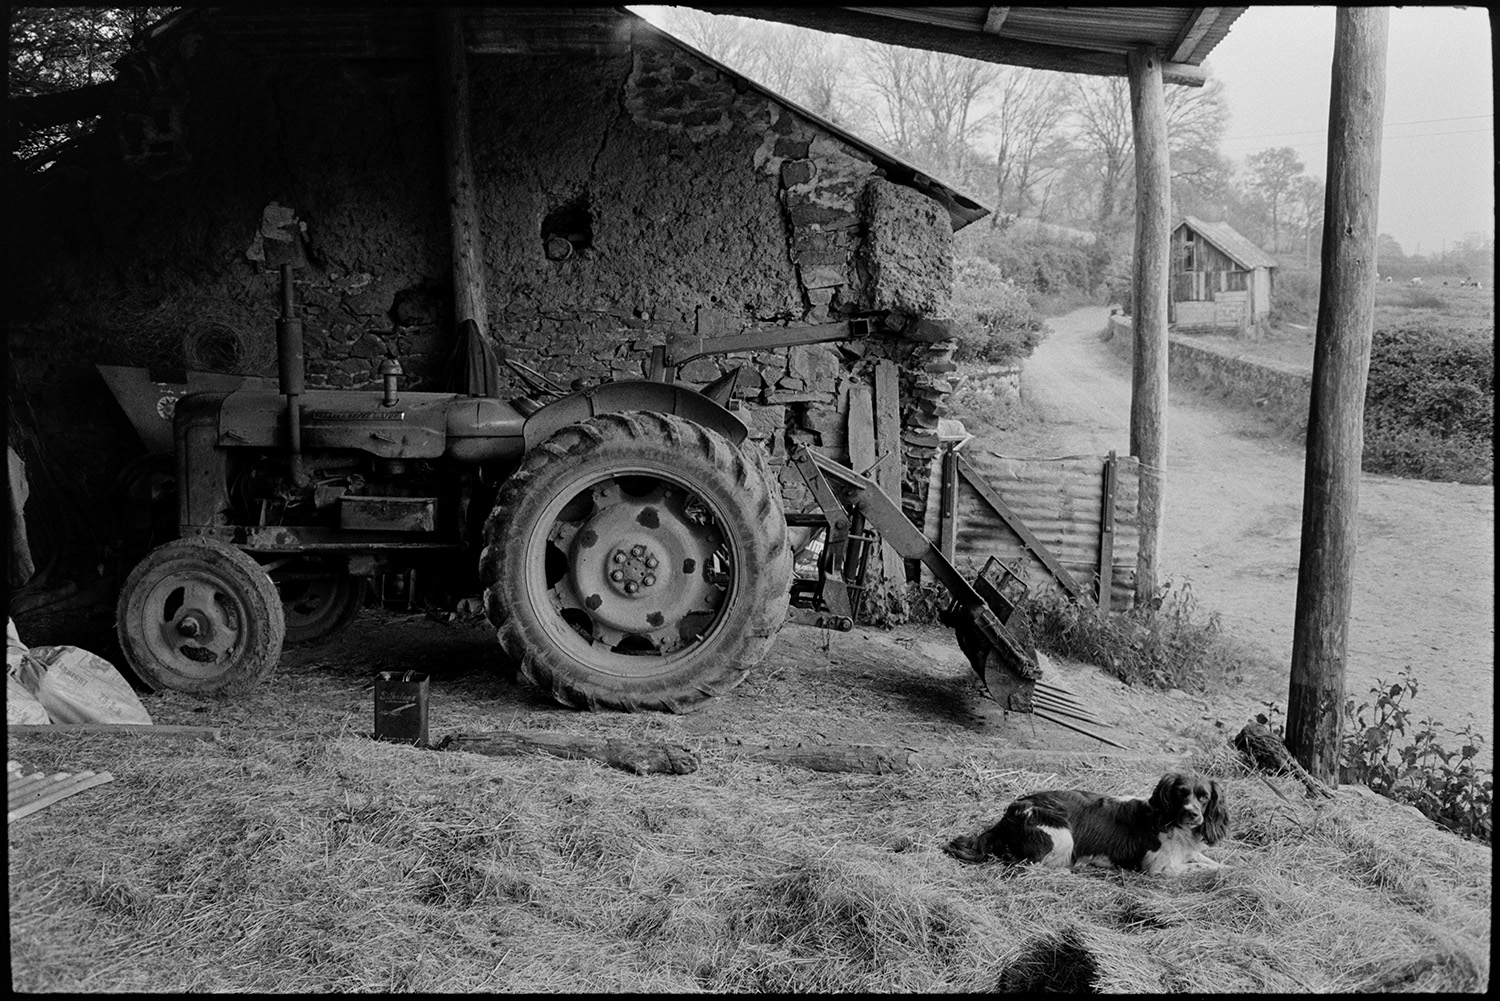 Modern barn with tractor.
[A tractor parked in an open barn next to a road. A dog is lying in straw in the barn and an oil can  is visible next to the tractor.]